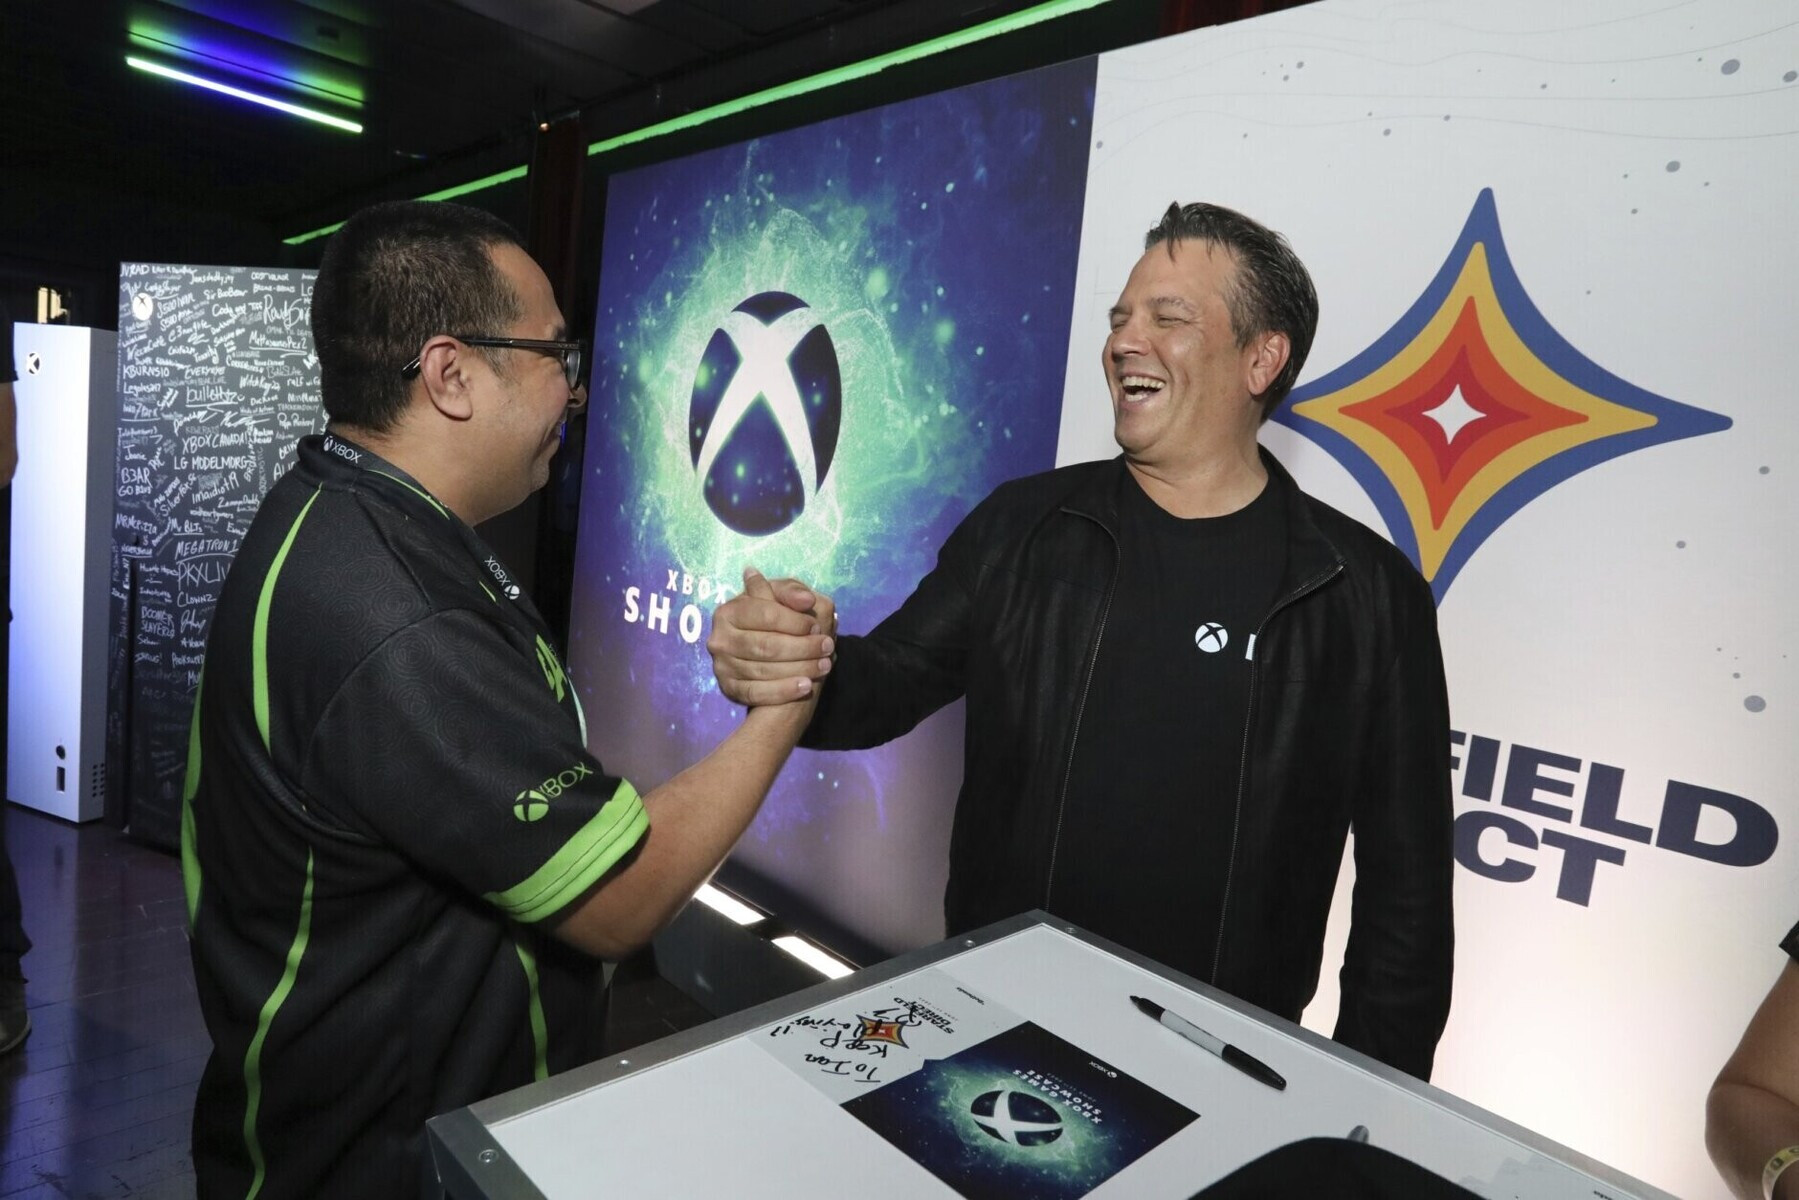 Phil Spencer Net Worth: How Much Is He Worth?